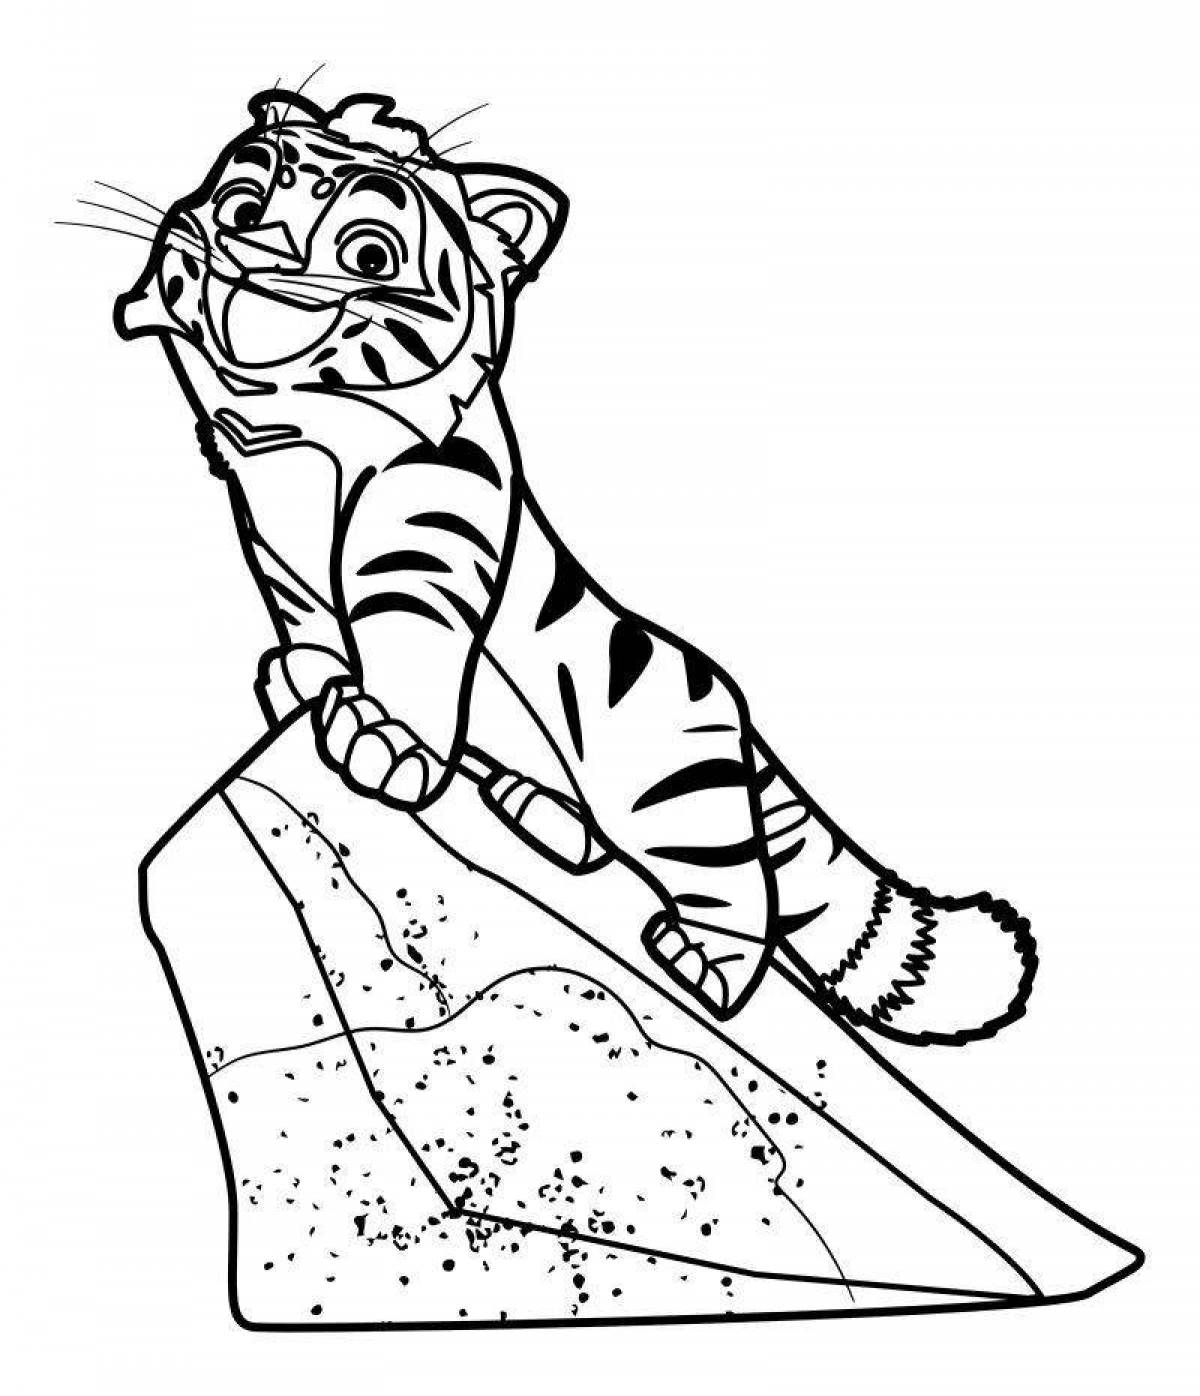 Playful tiger and lion coloring page for kids